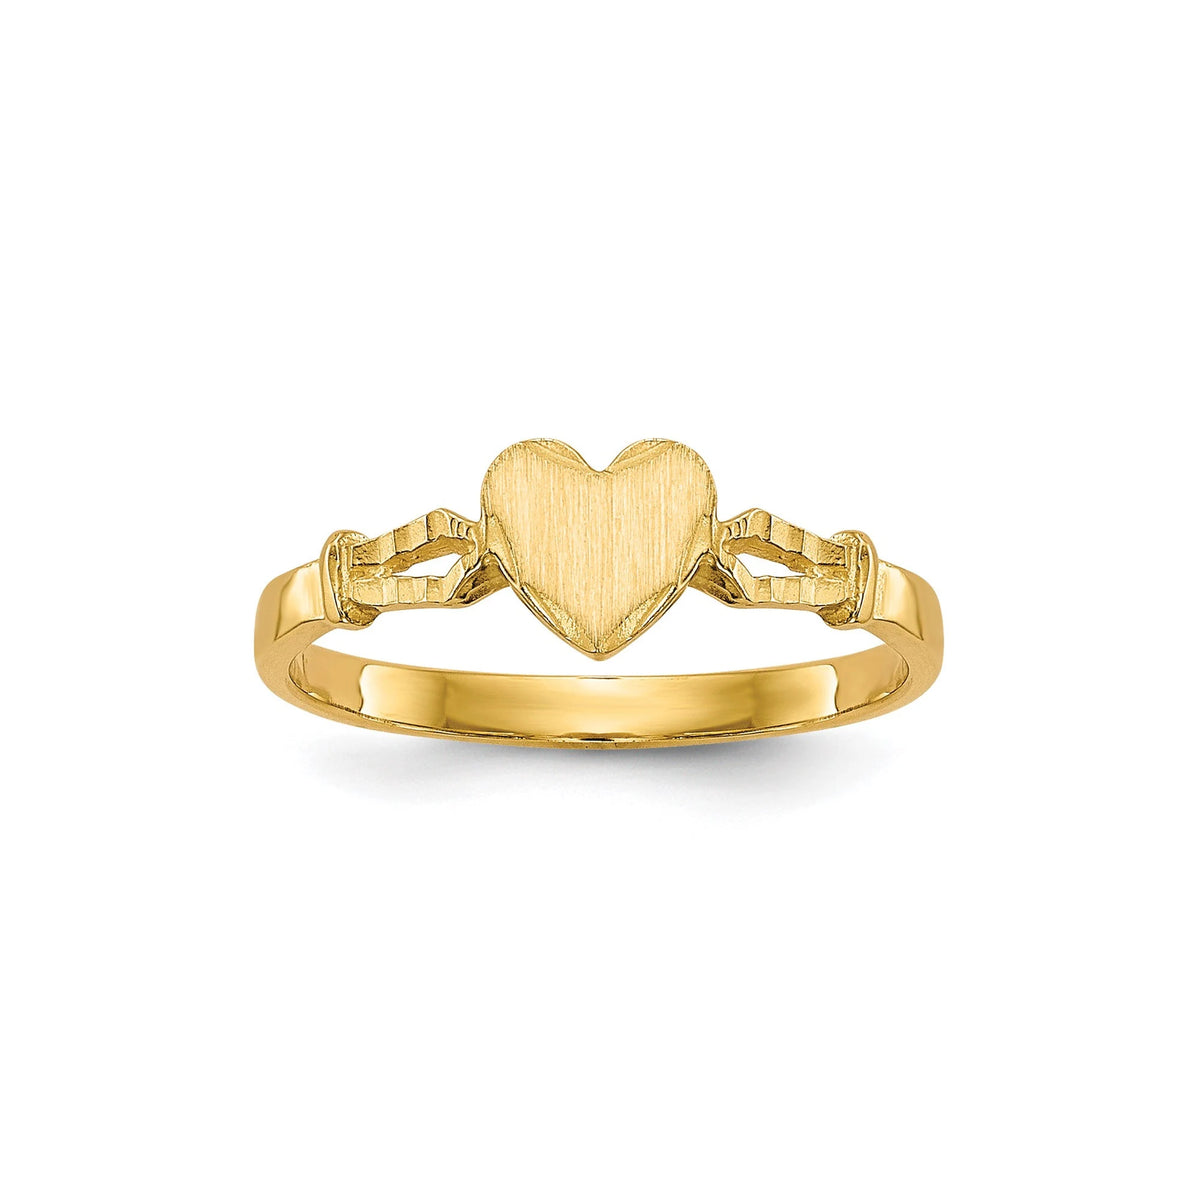 Genuine 14k Yellow Gold Heart Ring Baby Child  Size 1 -5 Baby to  Toddler Size Children's Ring Band with Heart - Gift Box Included